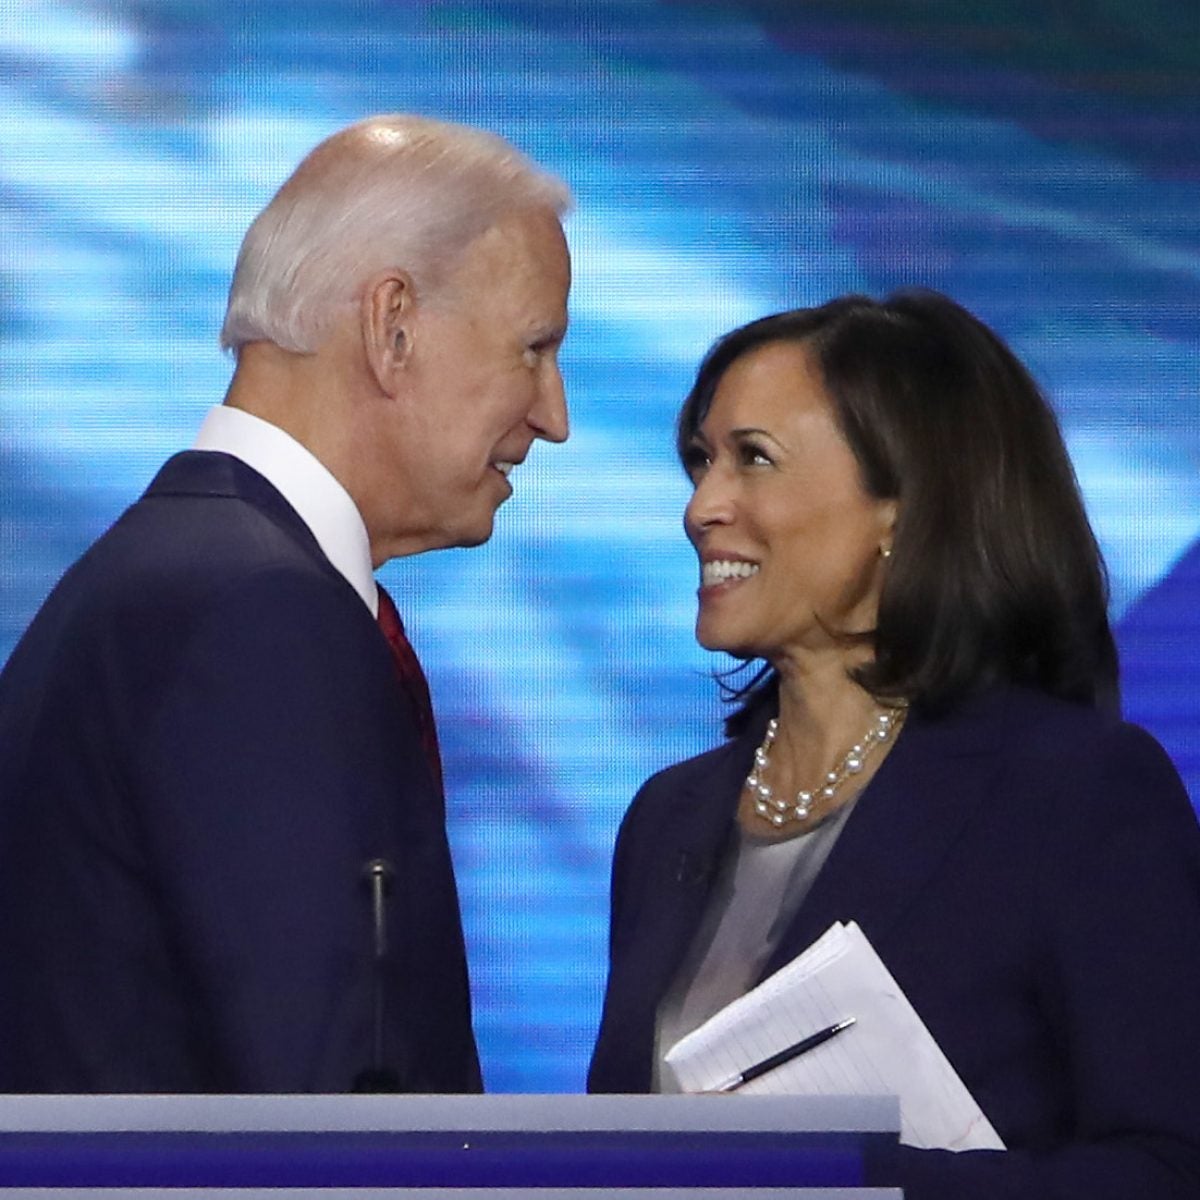 Joe Biden Reveals Four Black Women Are Being Strongly Considered As His Running Mate